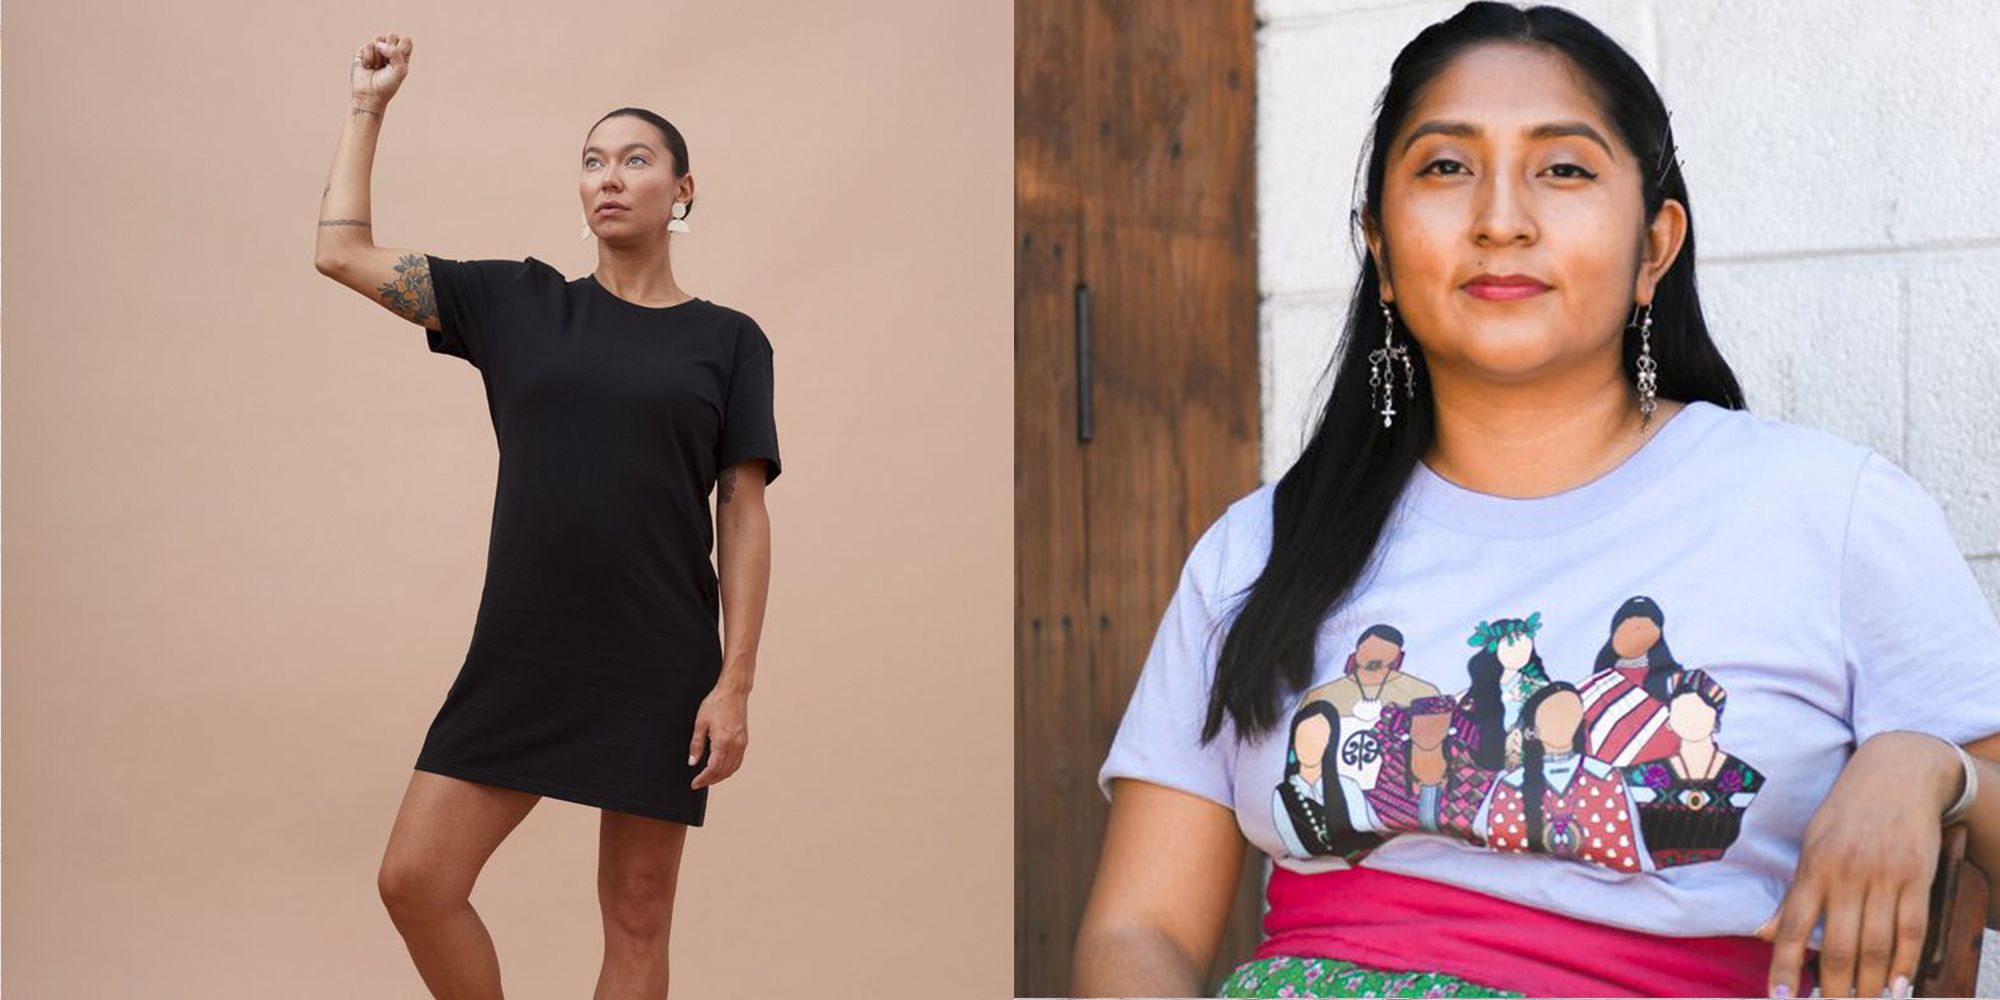 35 Indigenous and Native-Owned Clothing Brands and Companies